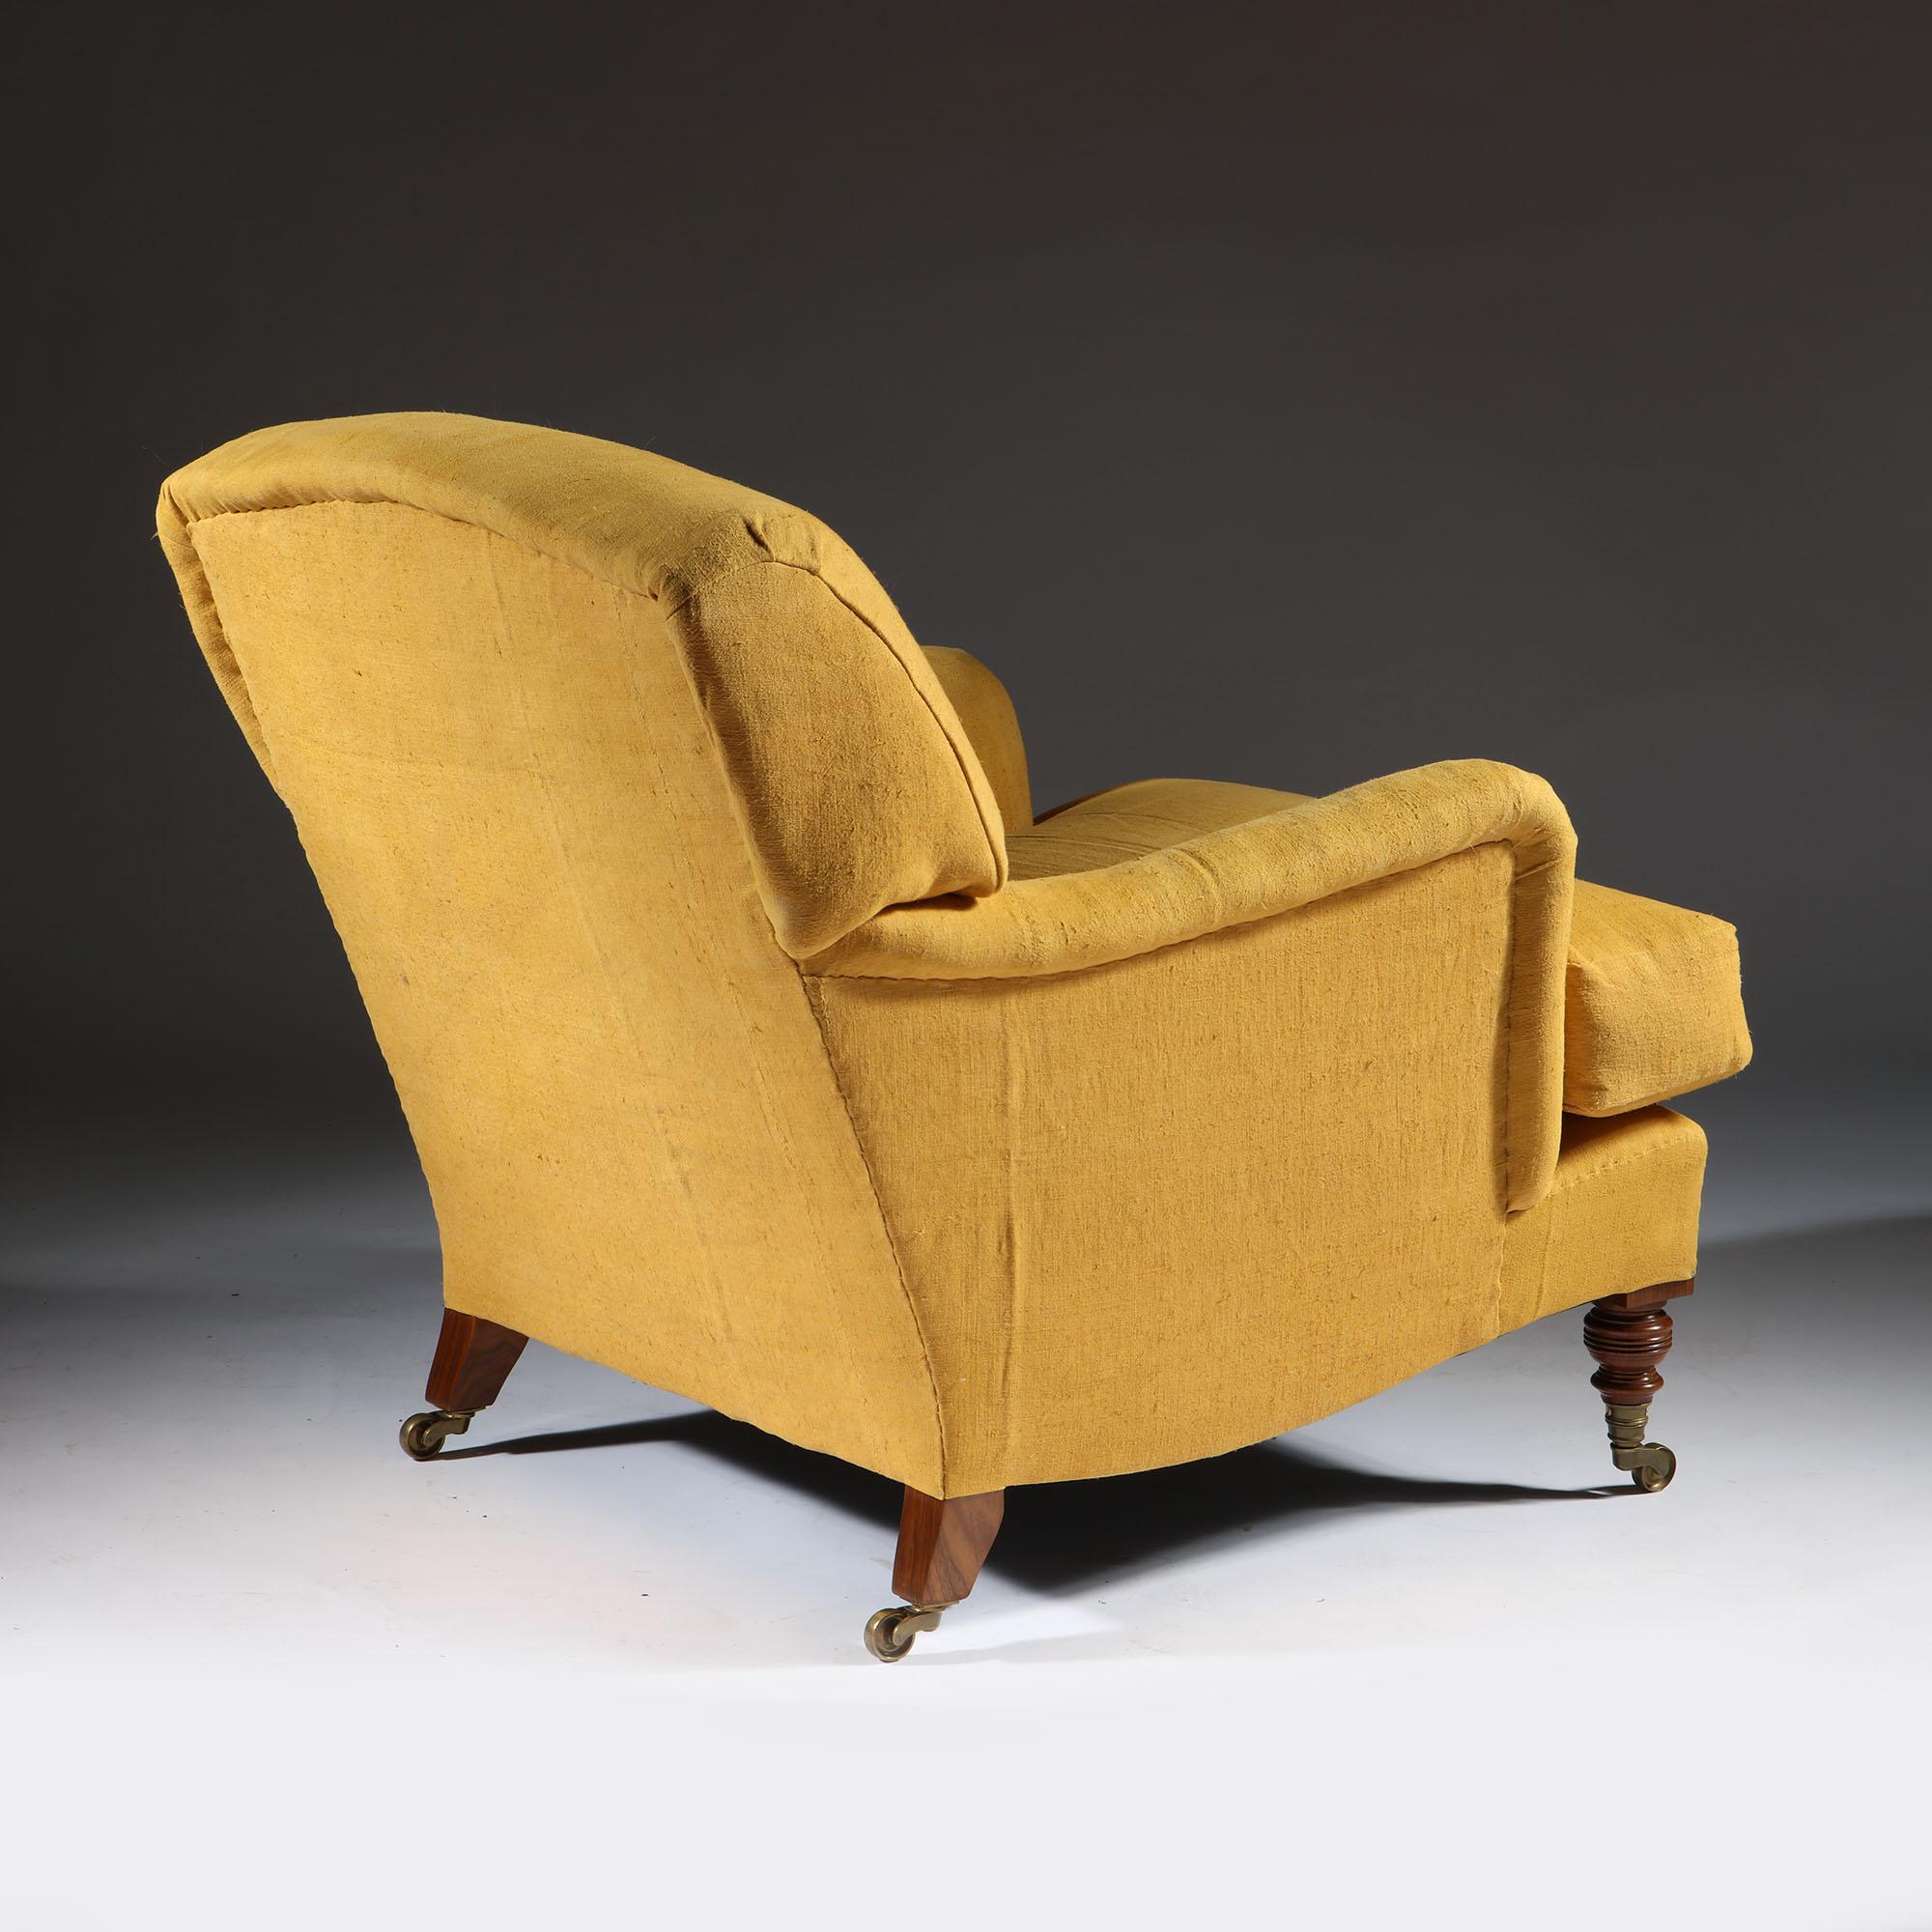 A fine handmade easy armchair, the frame modelled on an original by Howard and Sons, constructed from beechwood, the legs in walnut with brass castors. Upholstered using traditional methods using feather and down. All components made in Britain.